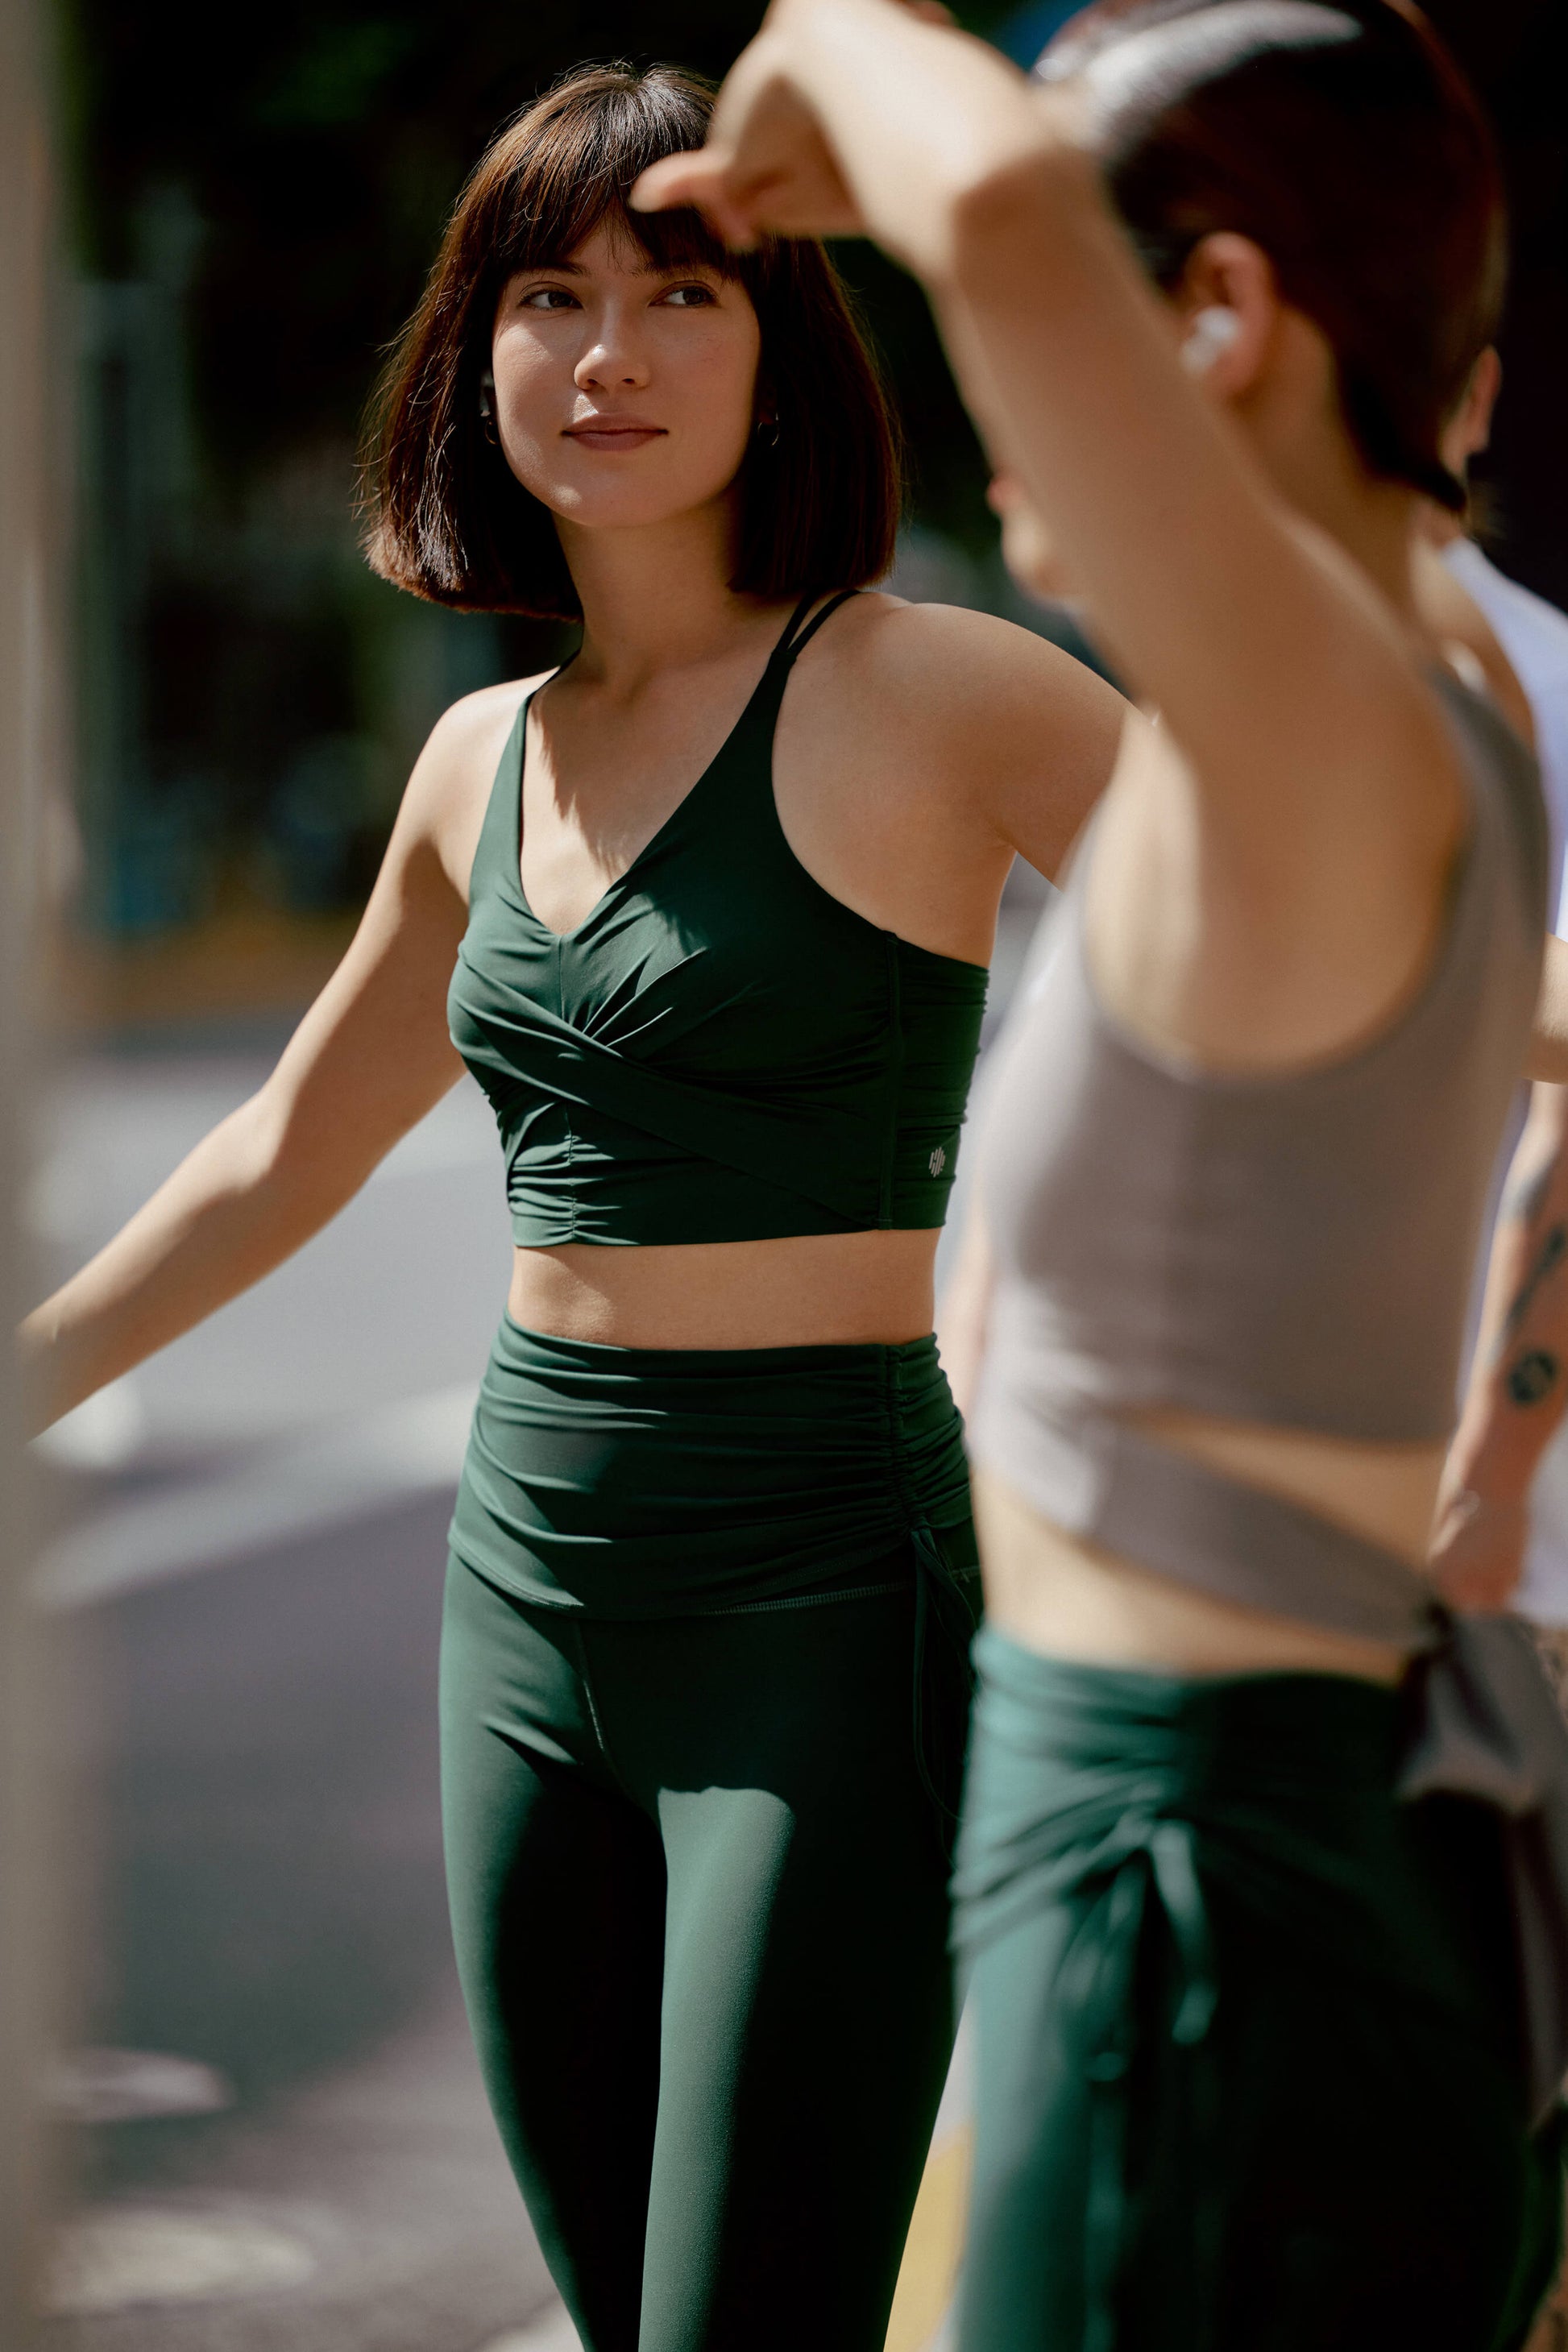 two women in workout outfit. One facing front is wearing a dark green v-neck sports bra with matching double layered waist leggings with side knots. One woman facing side is wearing a light grey top and same dark green leggings as the other woman.